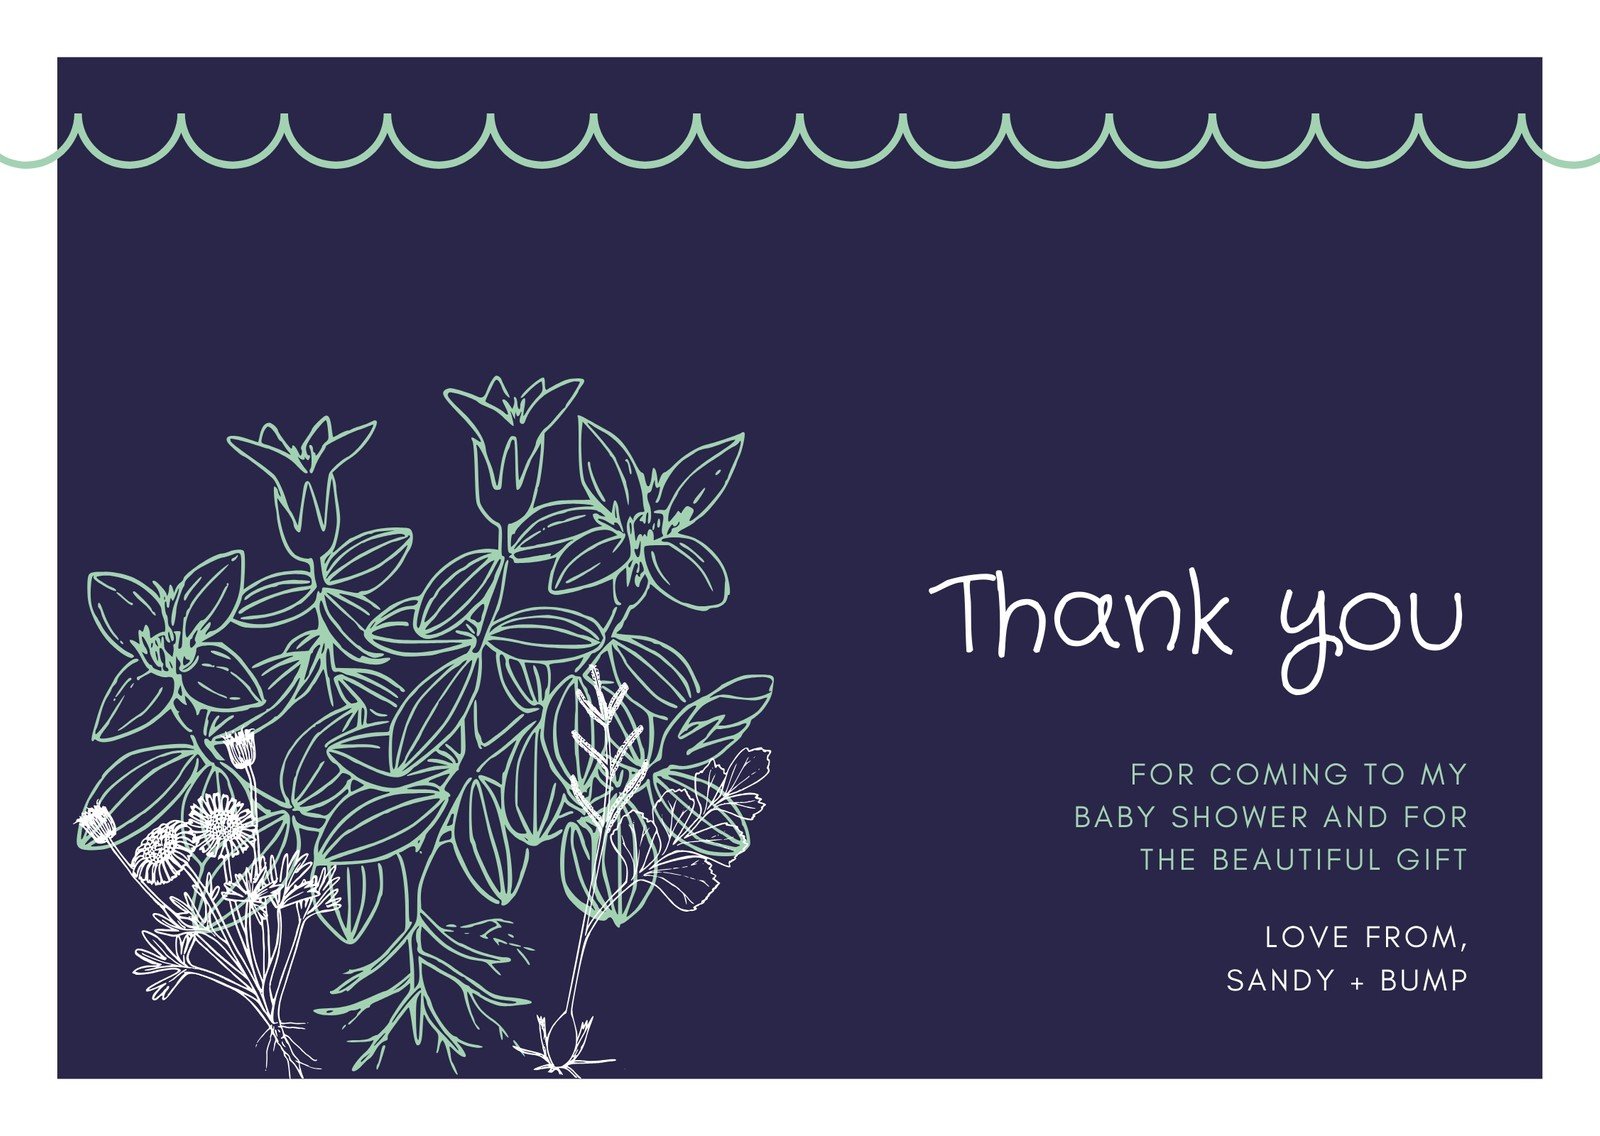 Customize 23+ Baby Shower Thank You Cards Templates Online - Canva Throughout Template For Baby Shower Thank You Cards